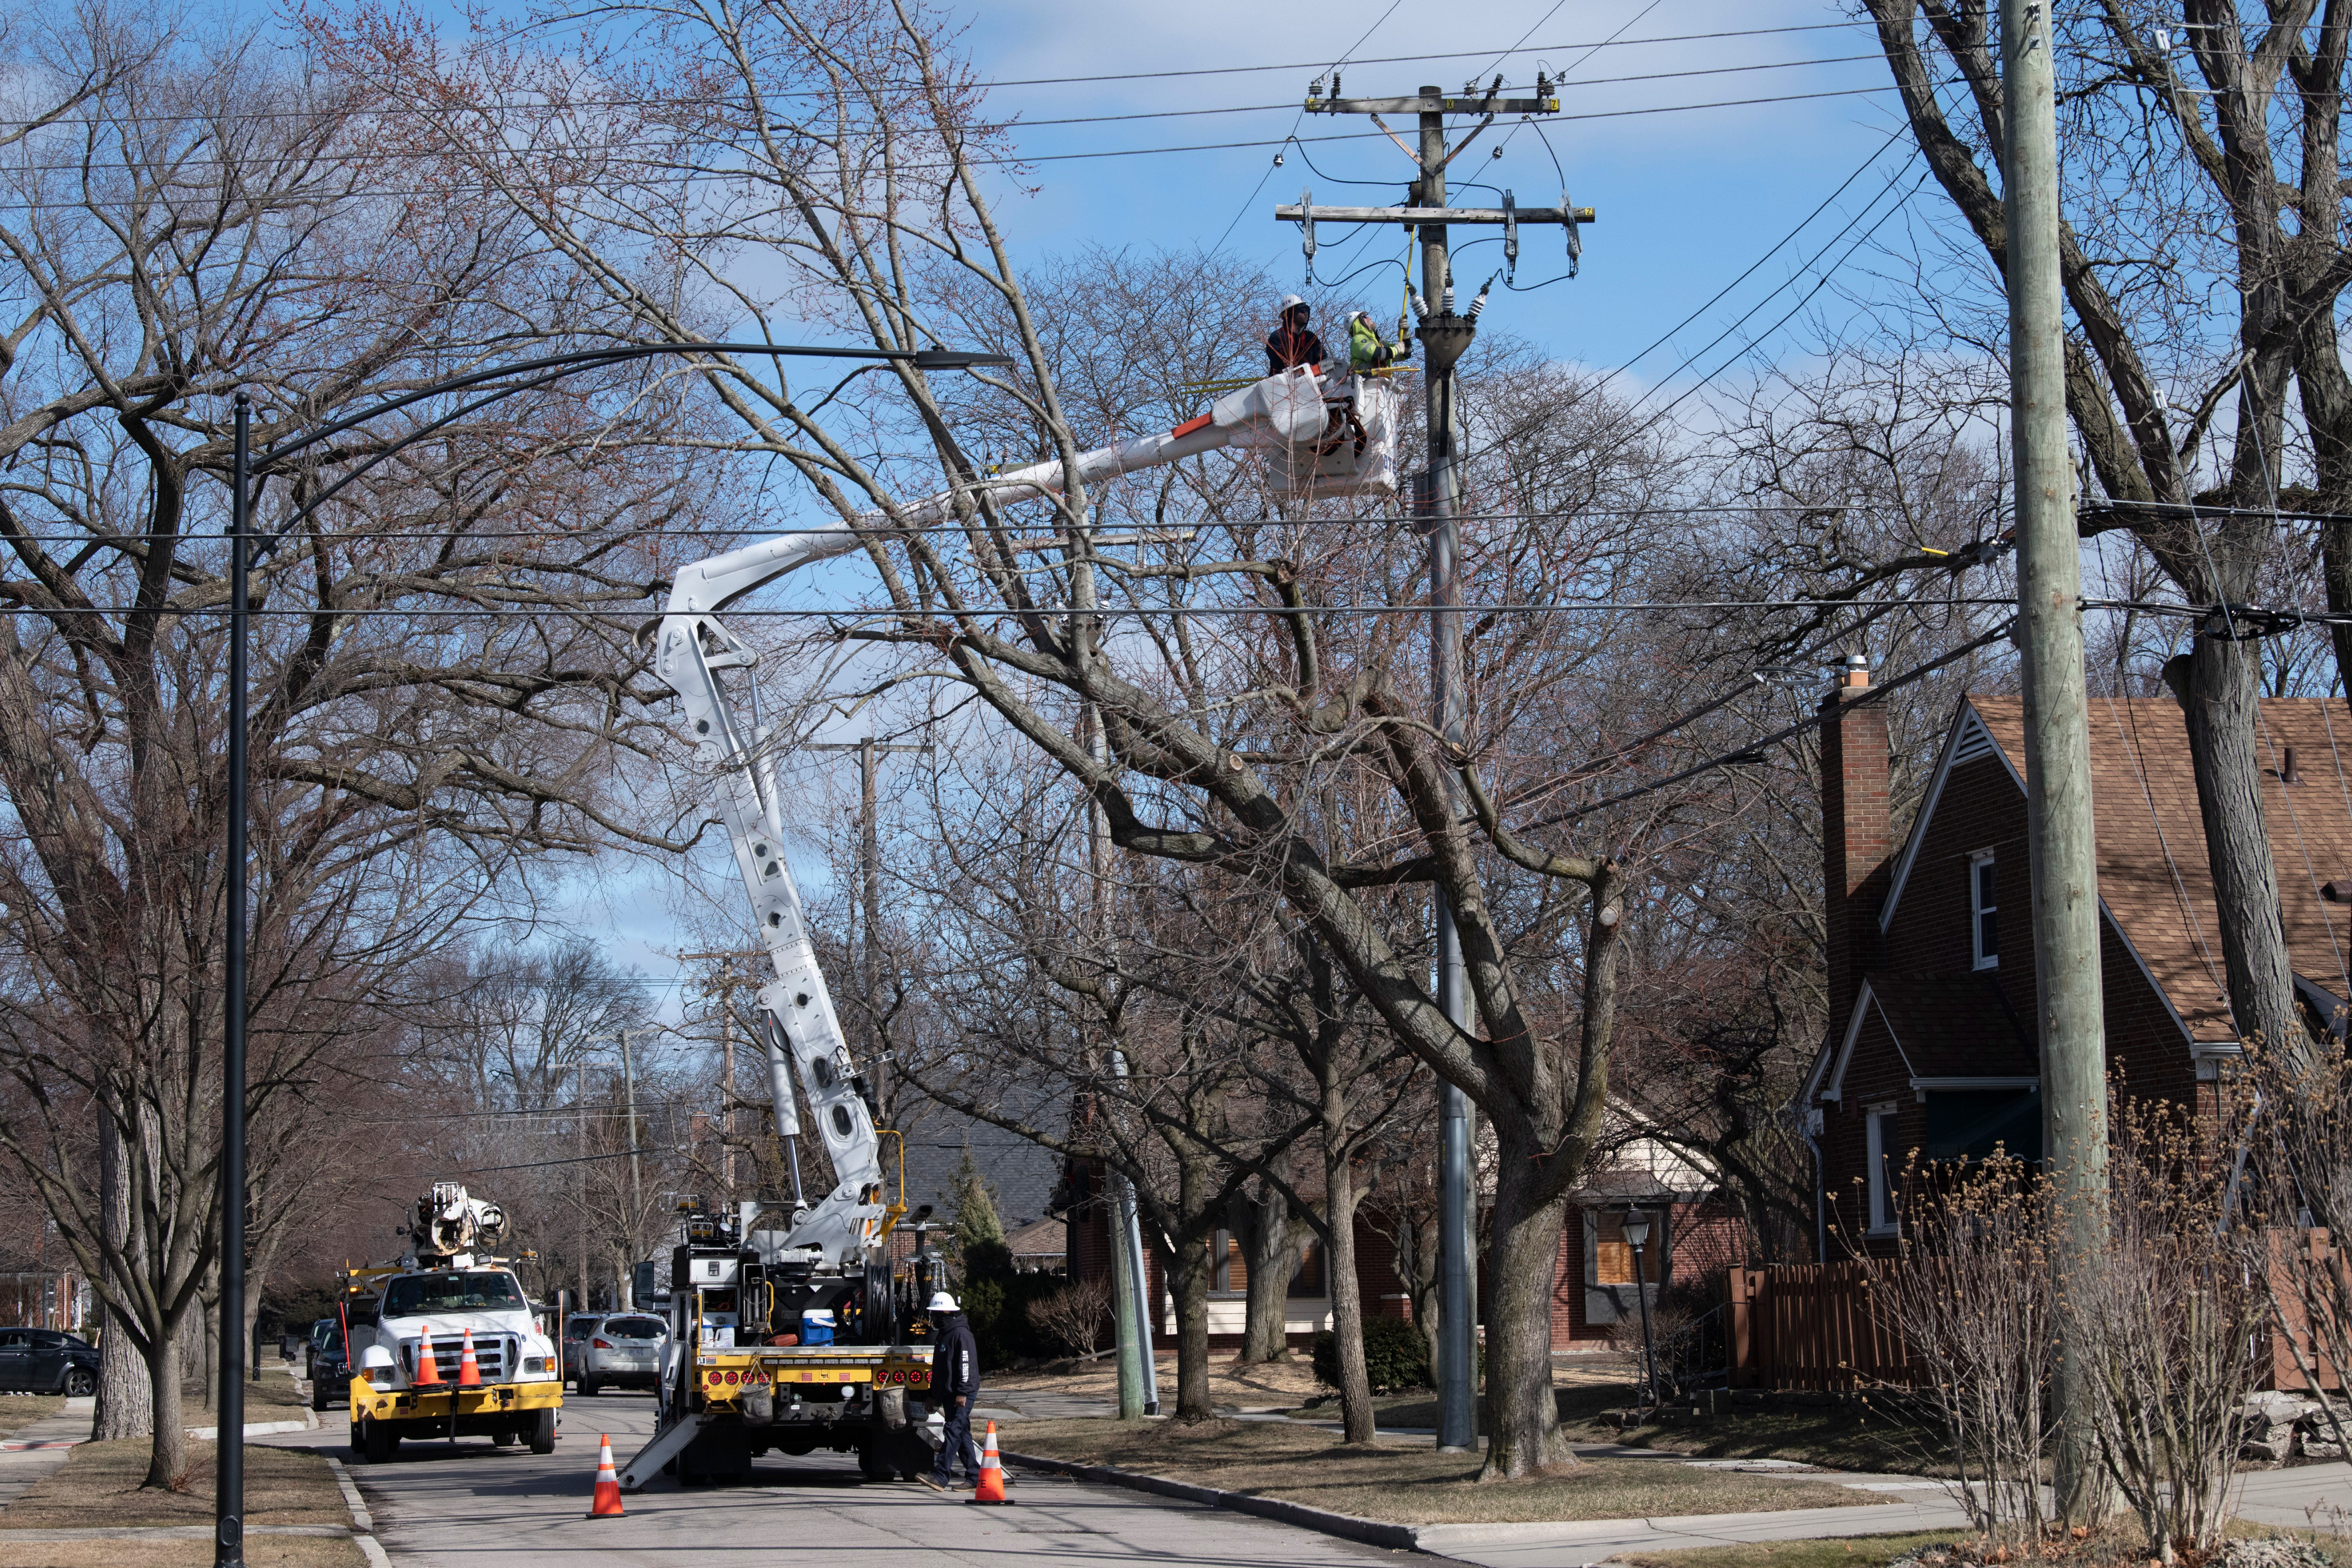 DTE servicemen work on Piche Street near Kerby Road in Grosse Pointe Woods to restore electricity to  the neighborhood Friday afternoon, February 24, 2023, after a midweek winter storm coated the area with freezing rain knocking out power to thousands of homes and businesses.